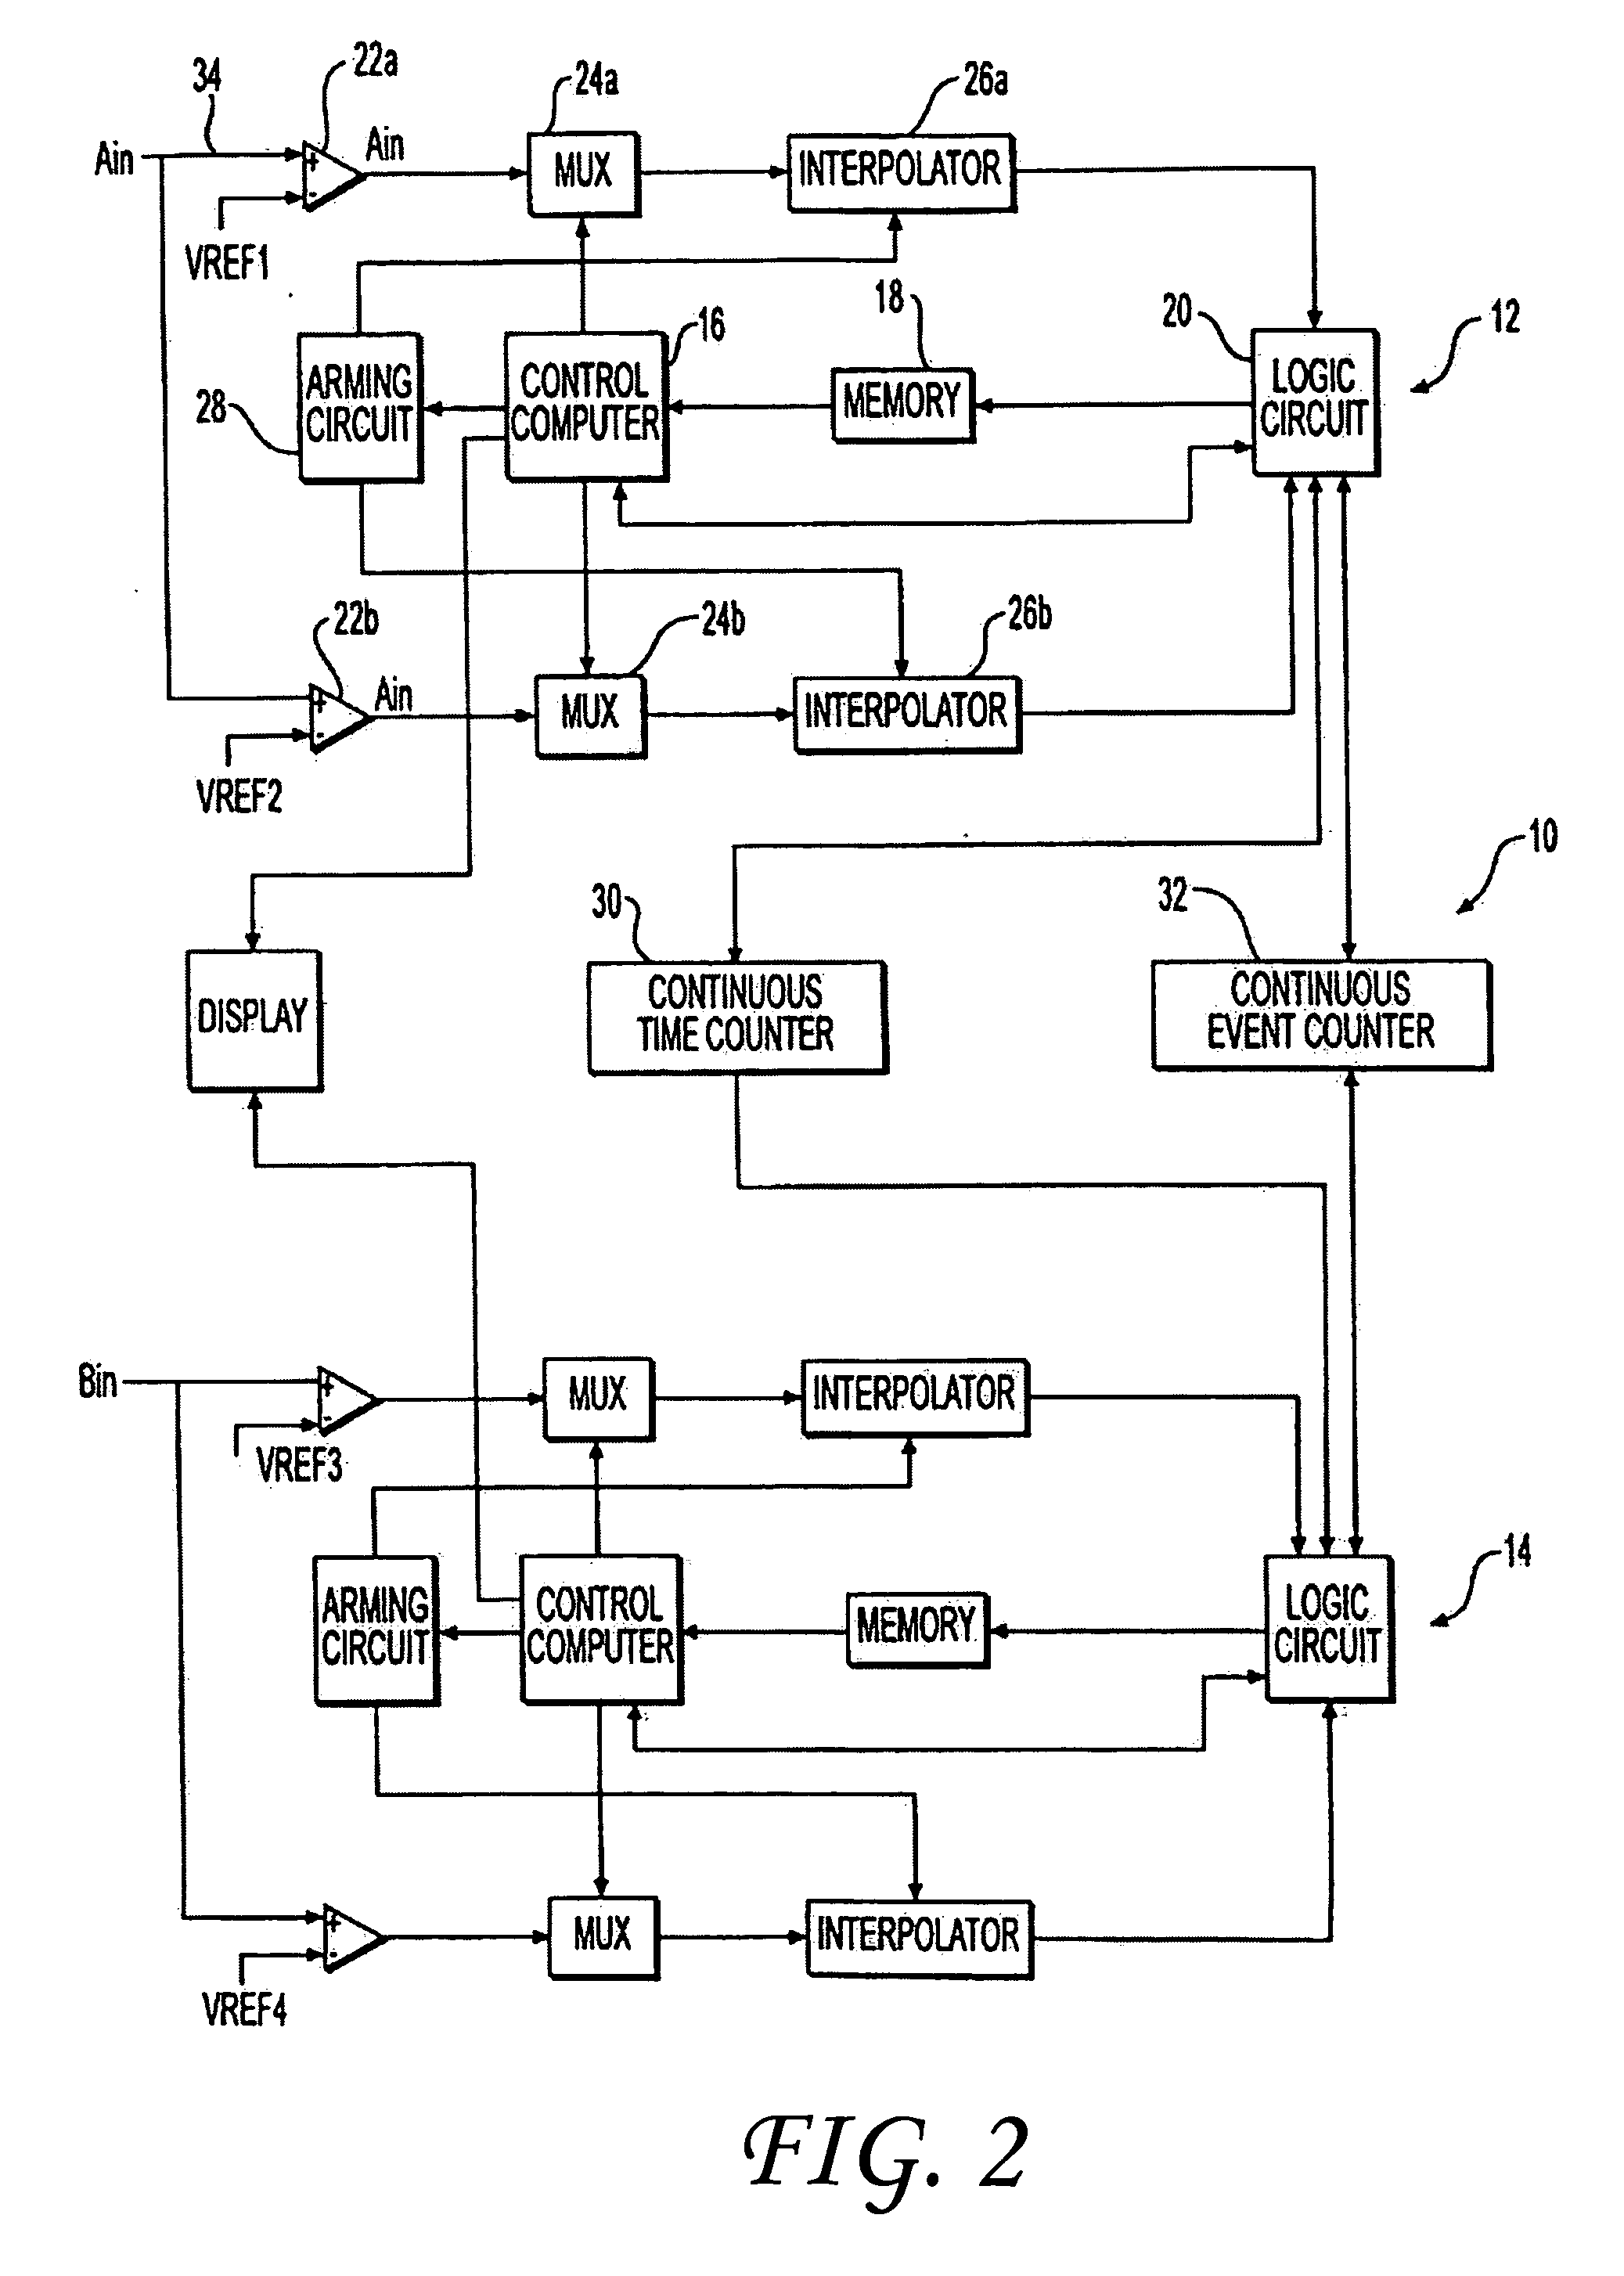 System and method of obtaining data-dependent jitter (DDJ) estimates from measured signal data